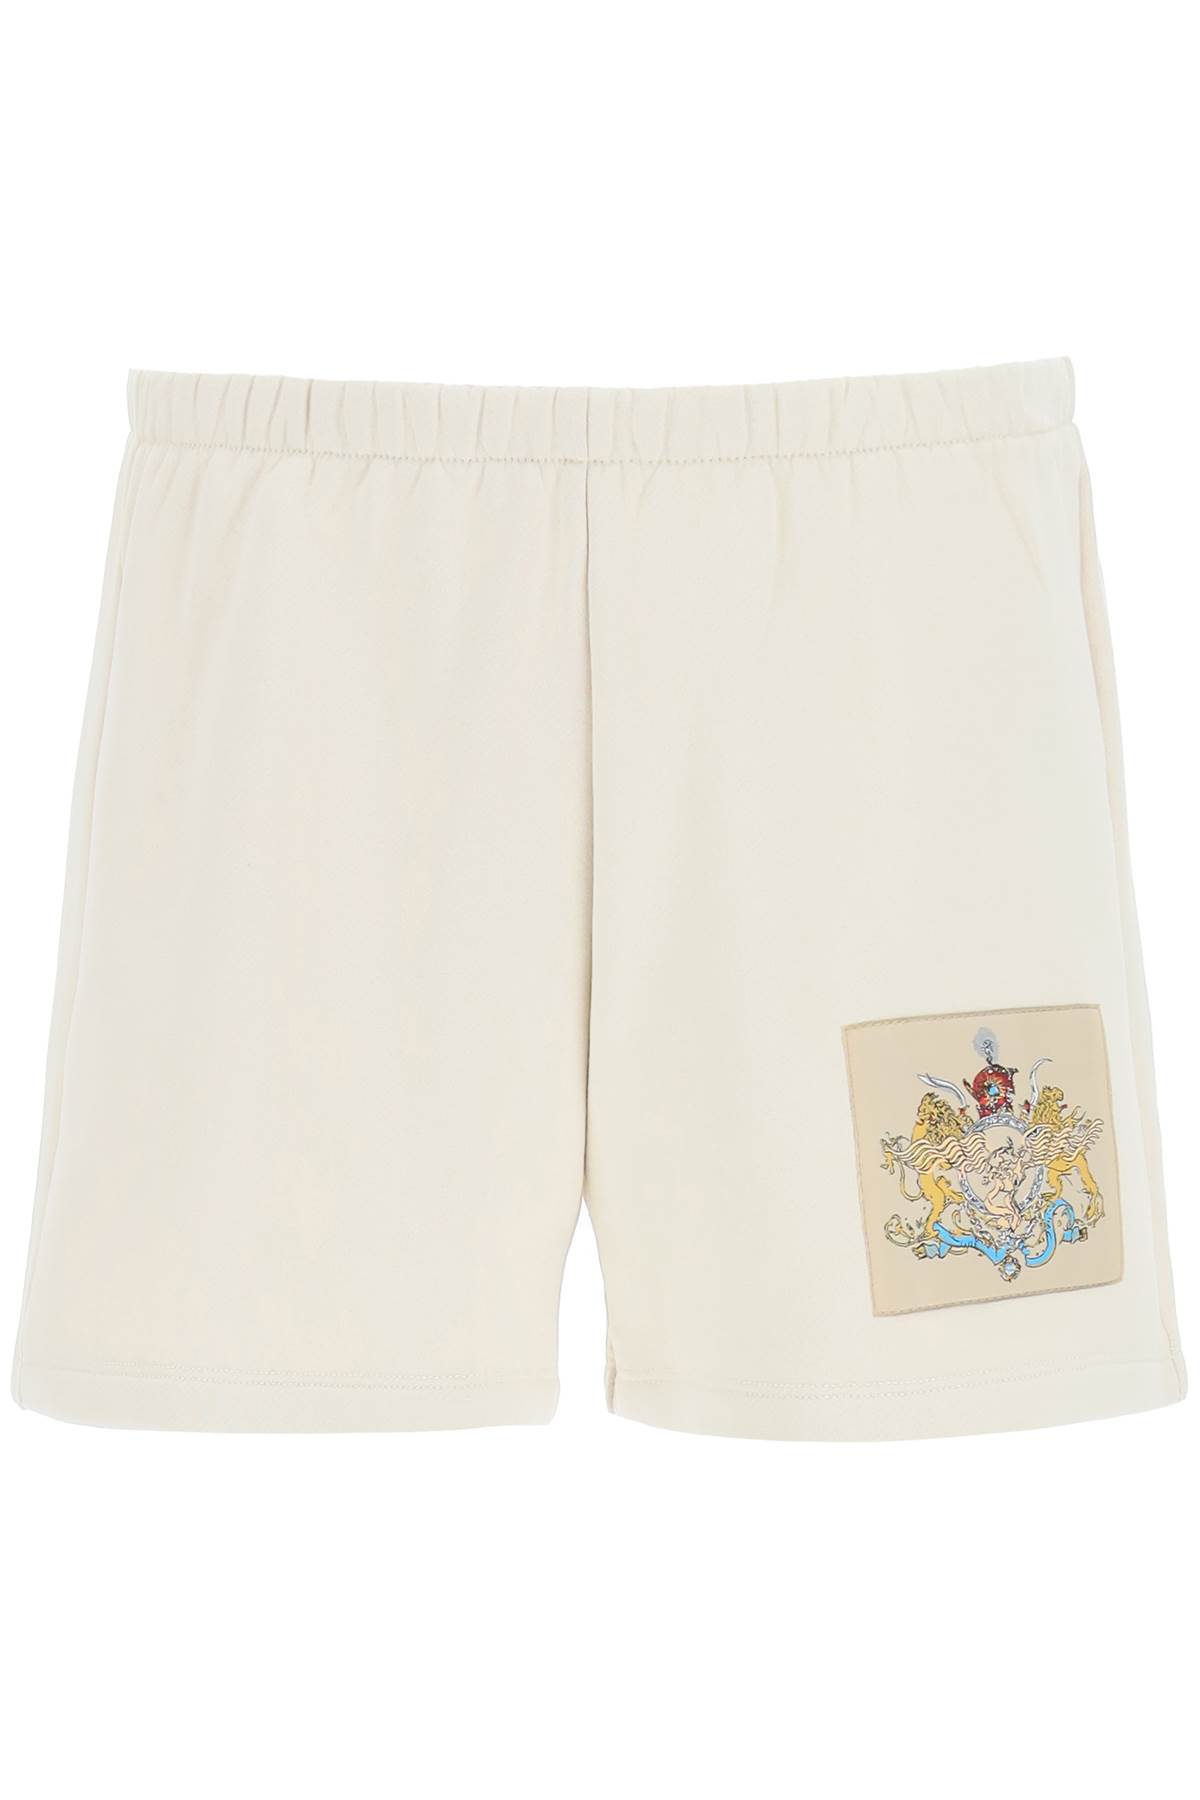 Liberal Youth Ministry Logo Sport Shorts